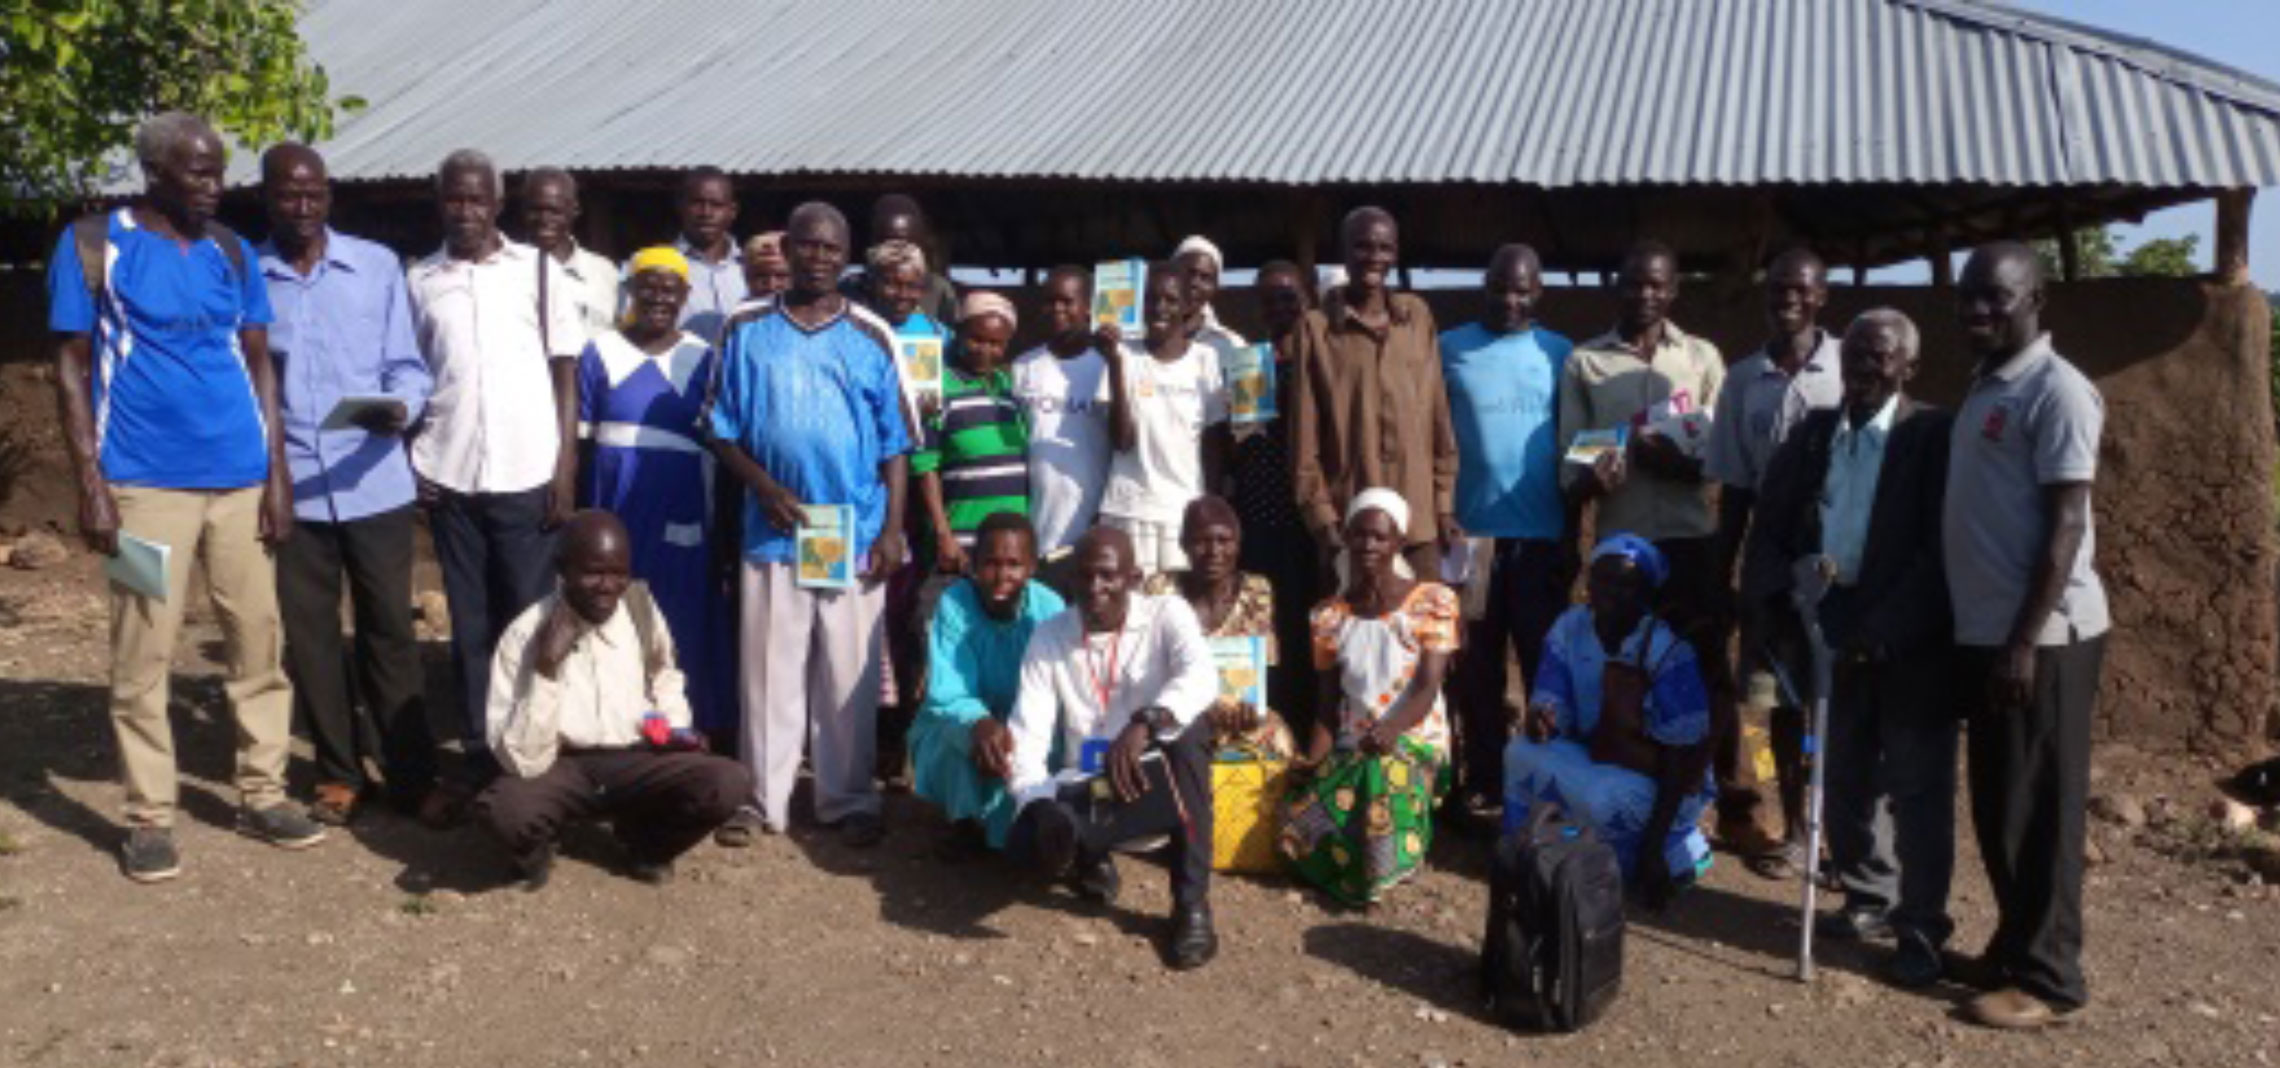 Group photo of Pastors & church Leaders attended Bible Study in Omugo